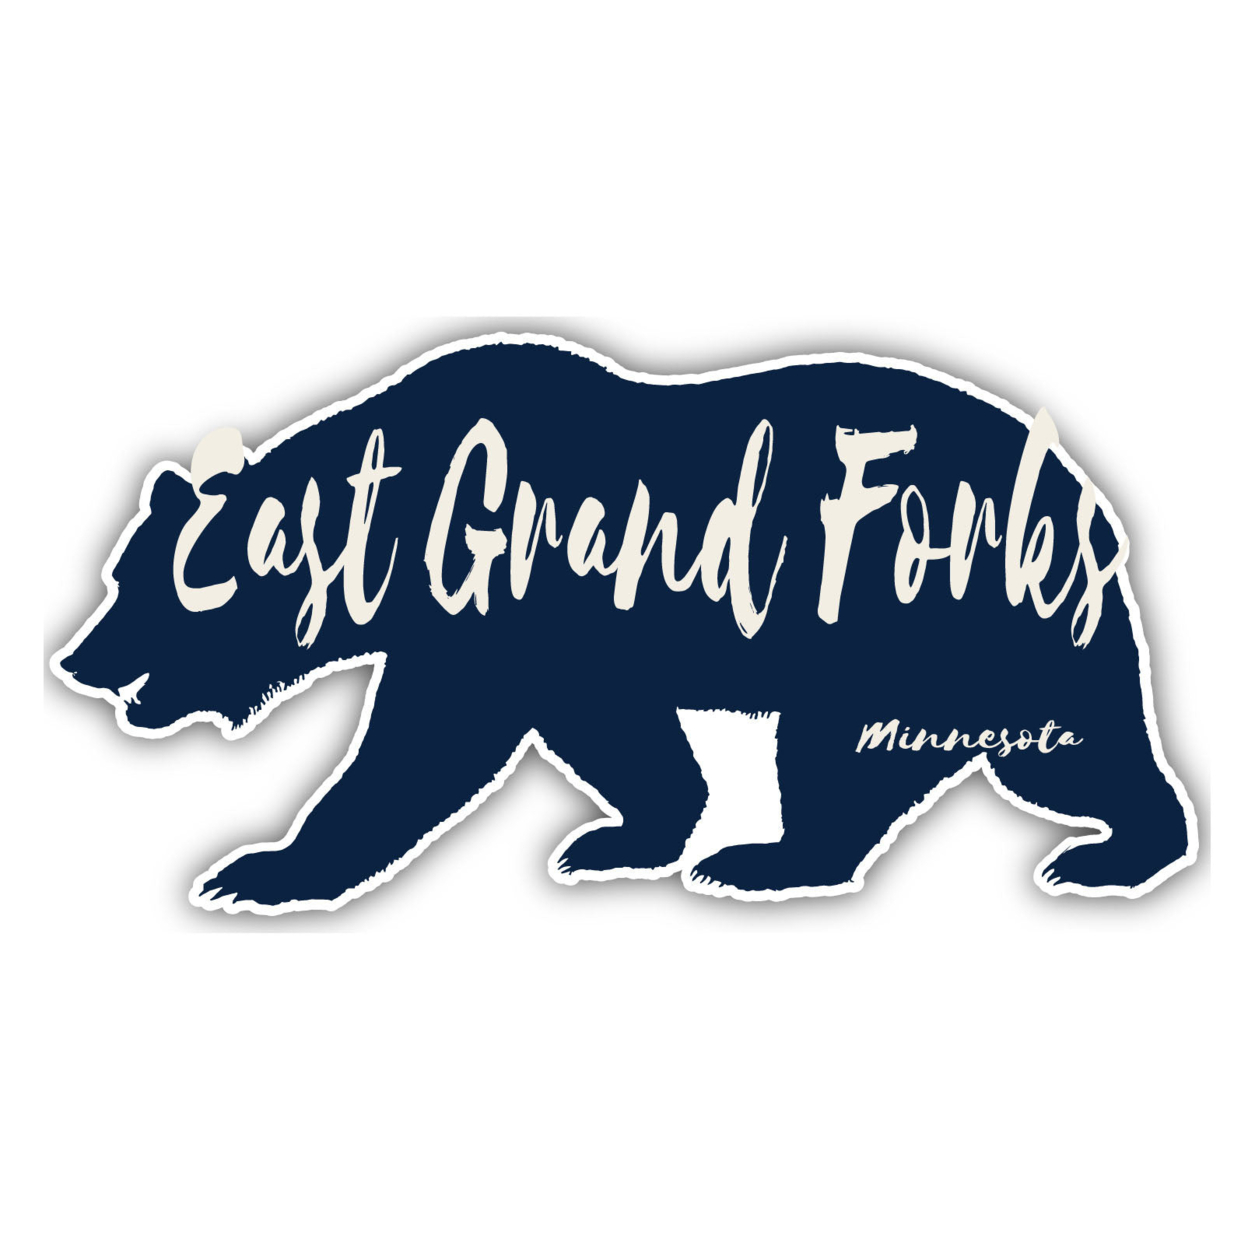 East Grand Forks Minnesota Souvenir Decorative Stickers (Choose Theme And Size) - Single Unit, 8-Inch, Camp Life